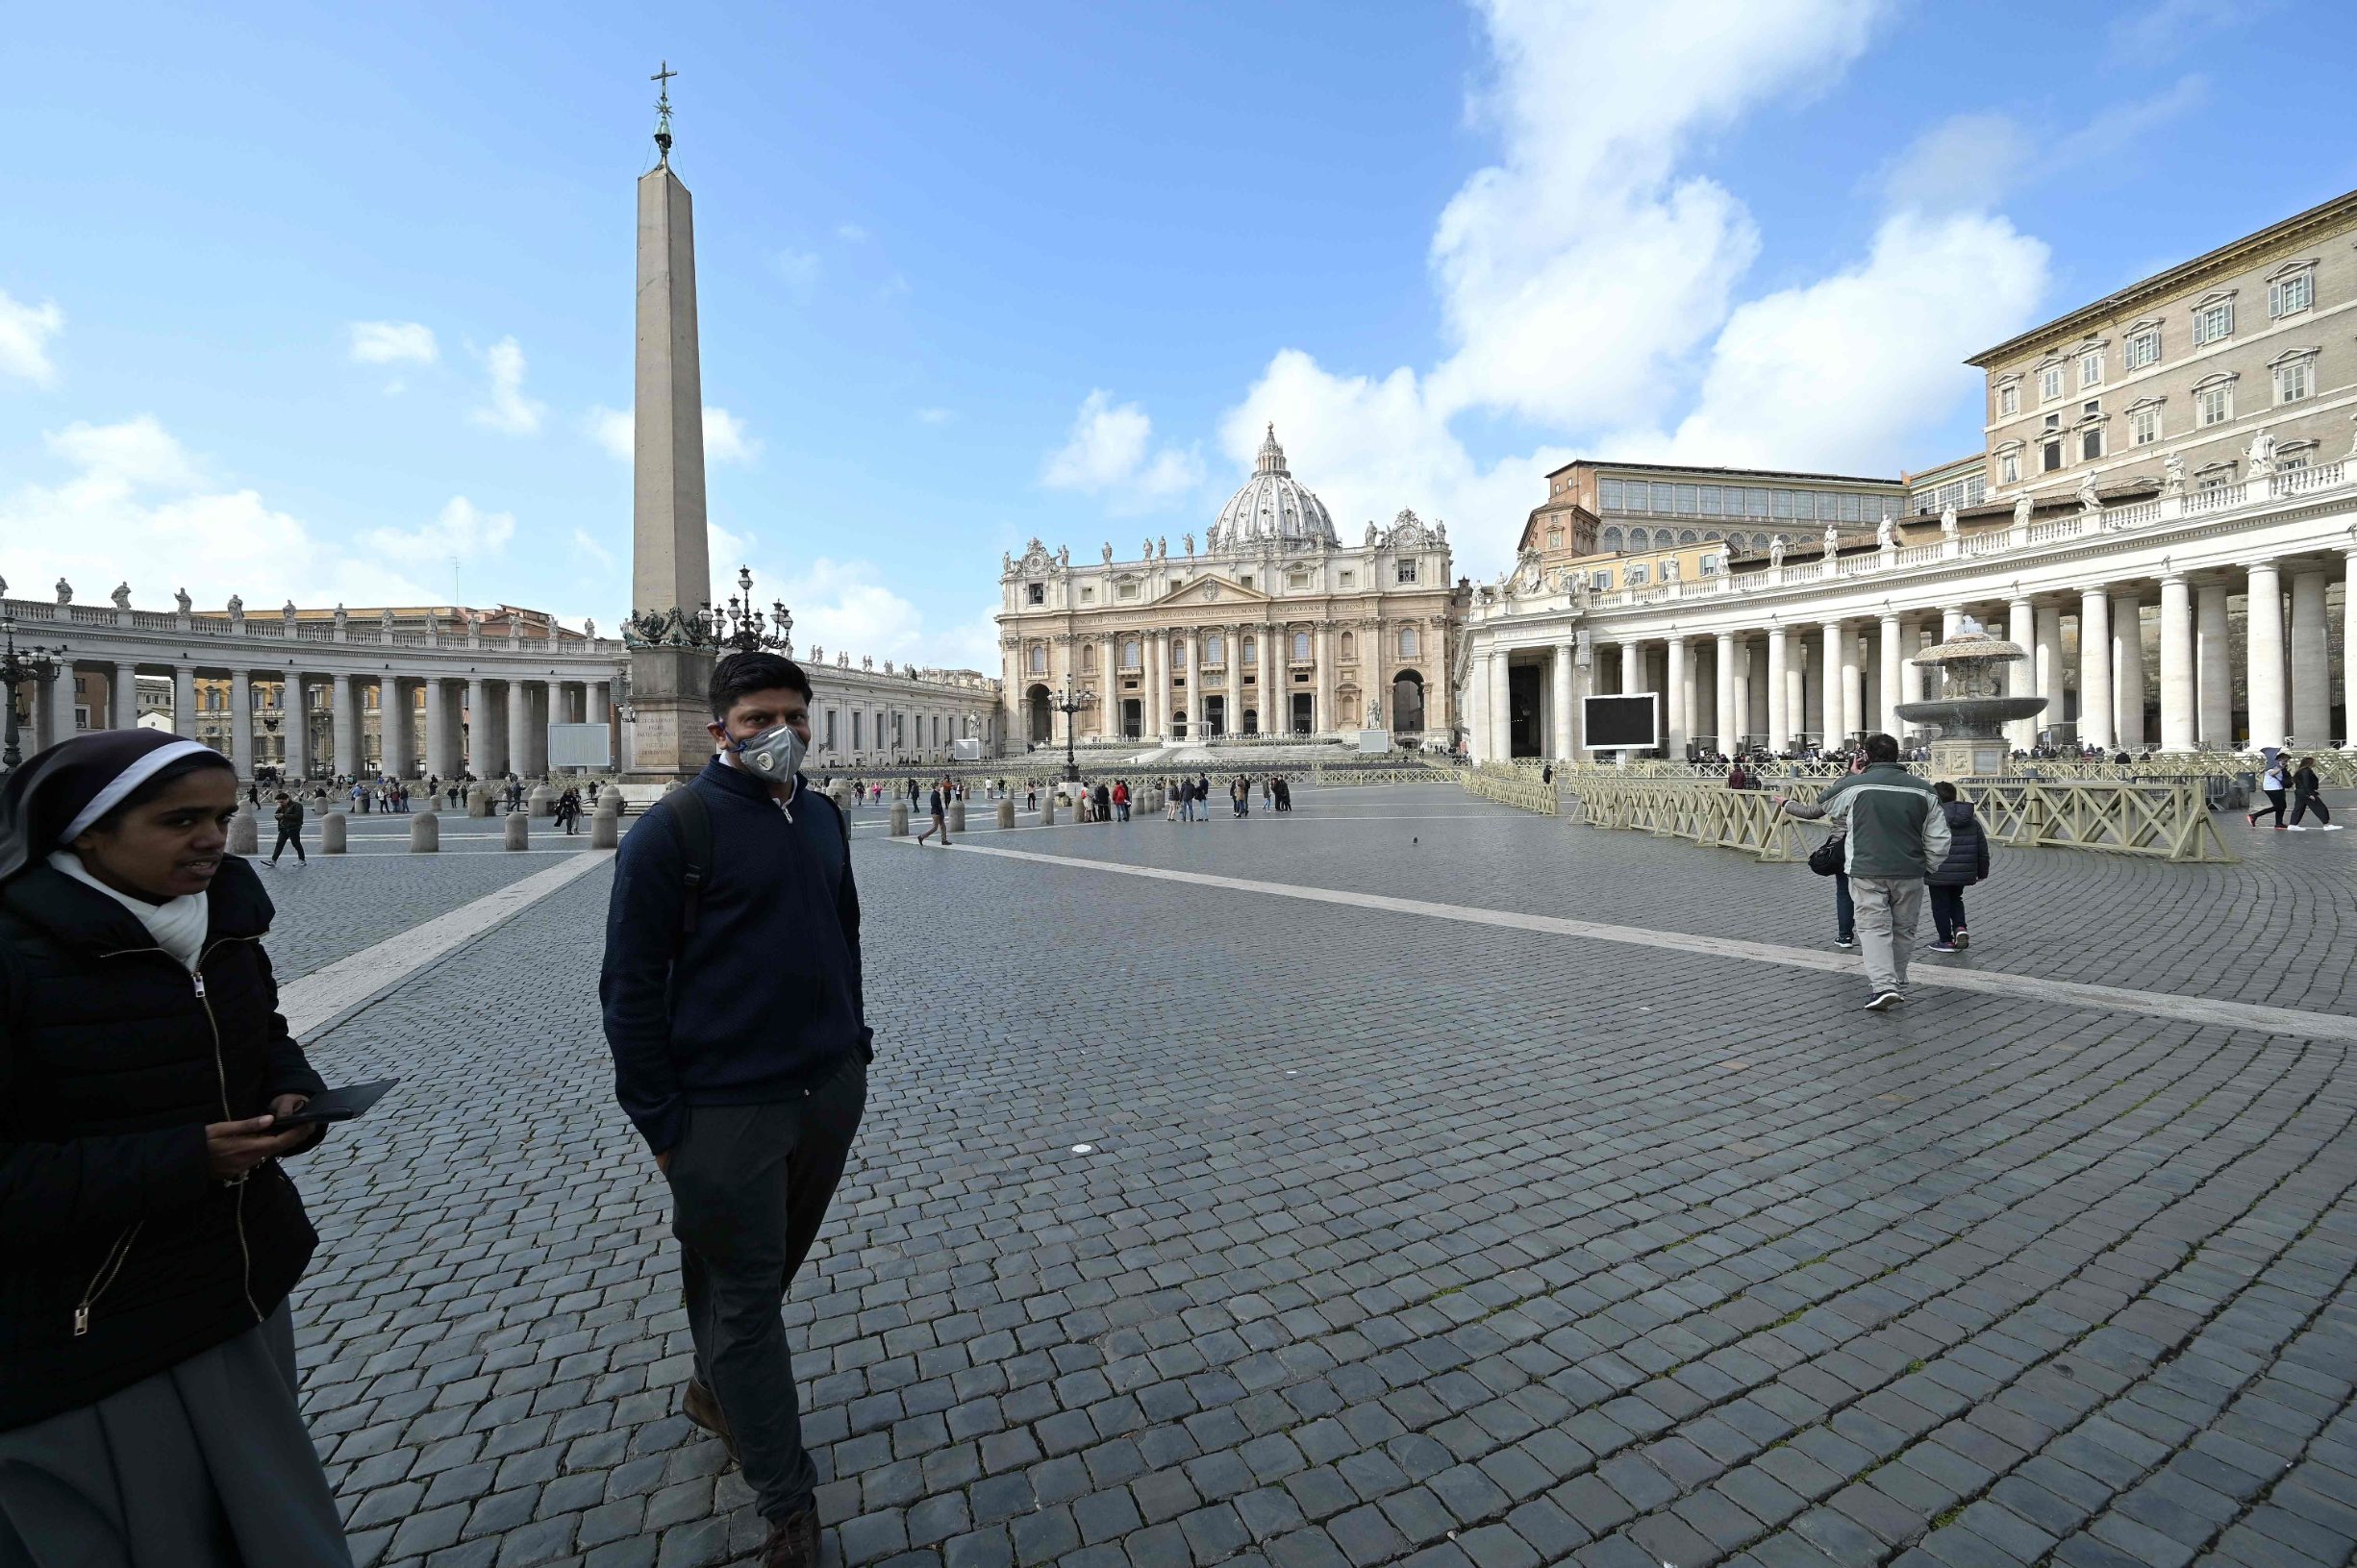 A man wearing a protective mask and a nun walk in a deserted St. Peter's square at the Vatican on March 6, 2020. - The Vatican on March 6 reported its first coronavirus case, saying it had suspended outpatient services at its health clinic after a patient tested positive for COVID-19. (Photo by Vincenzo PINTO / AFP)